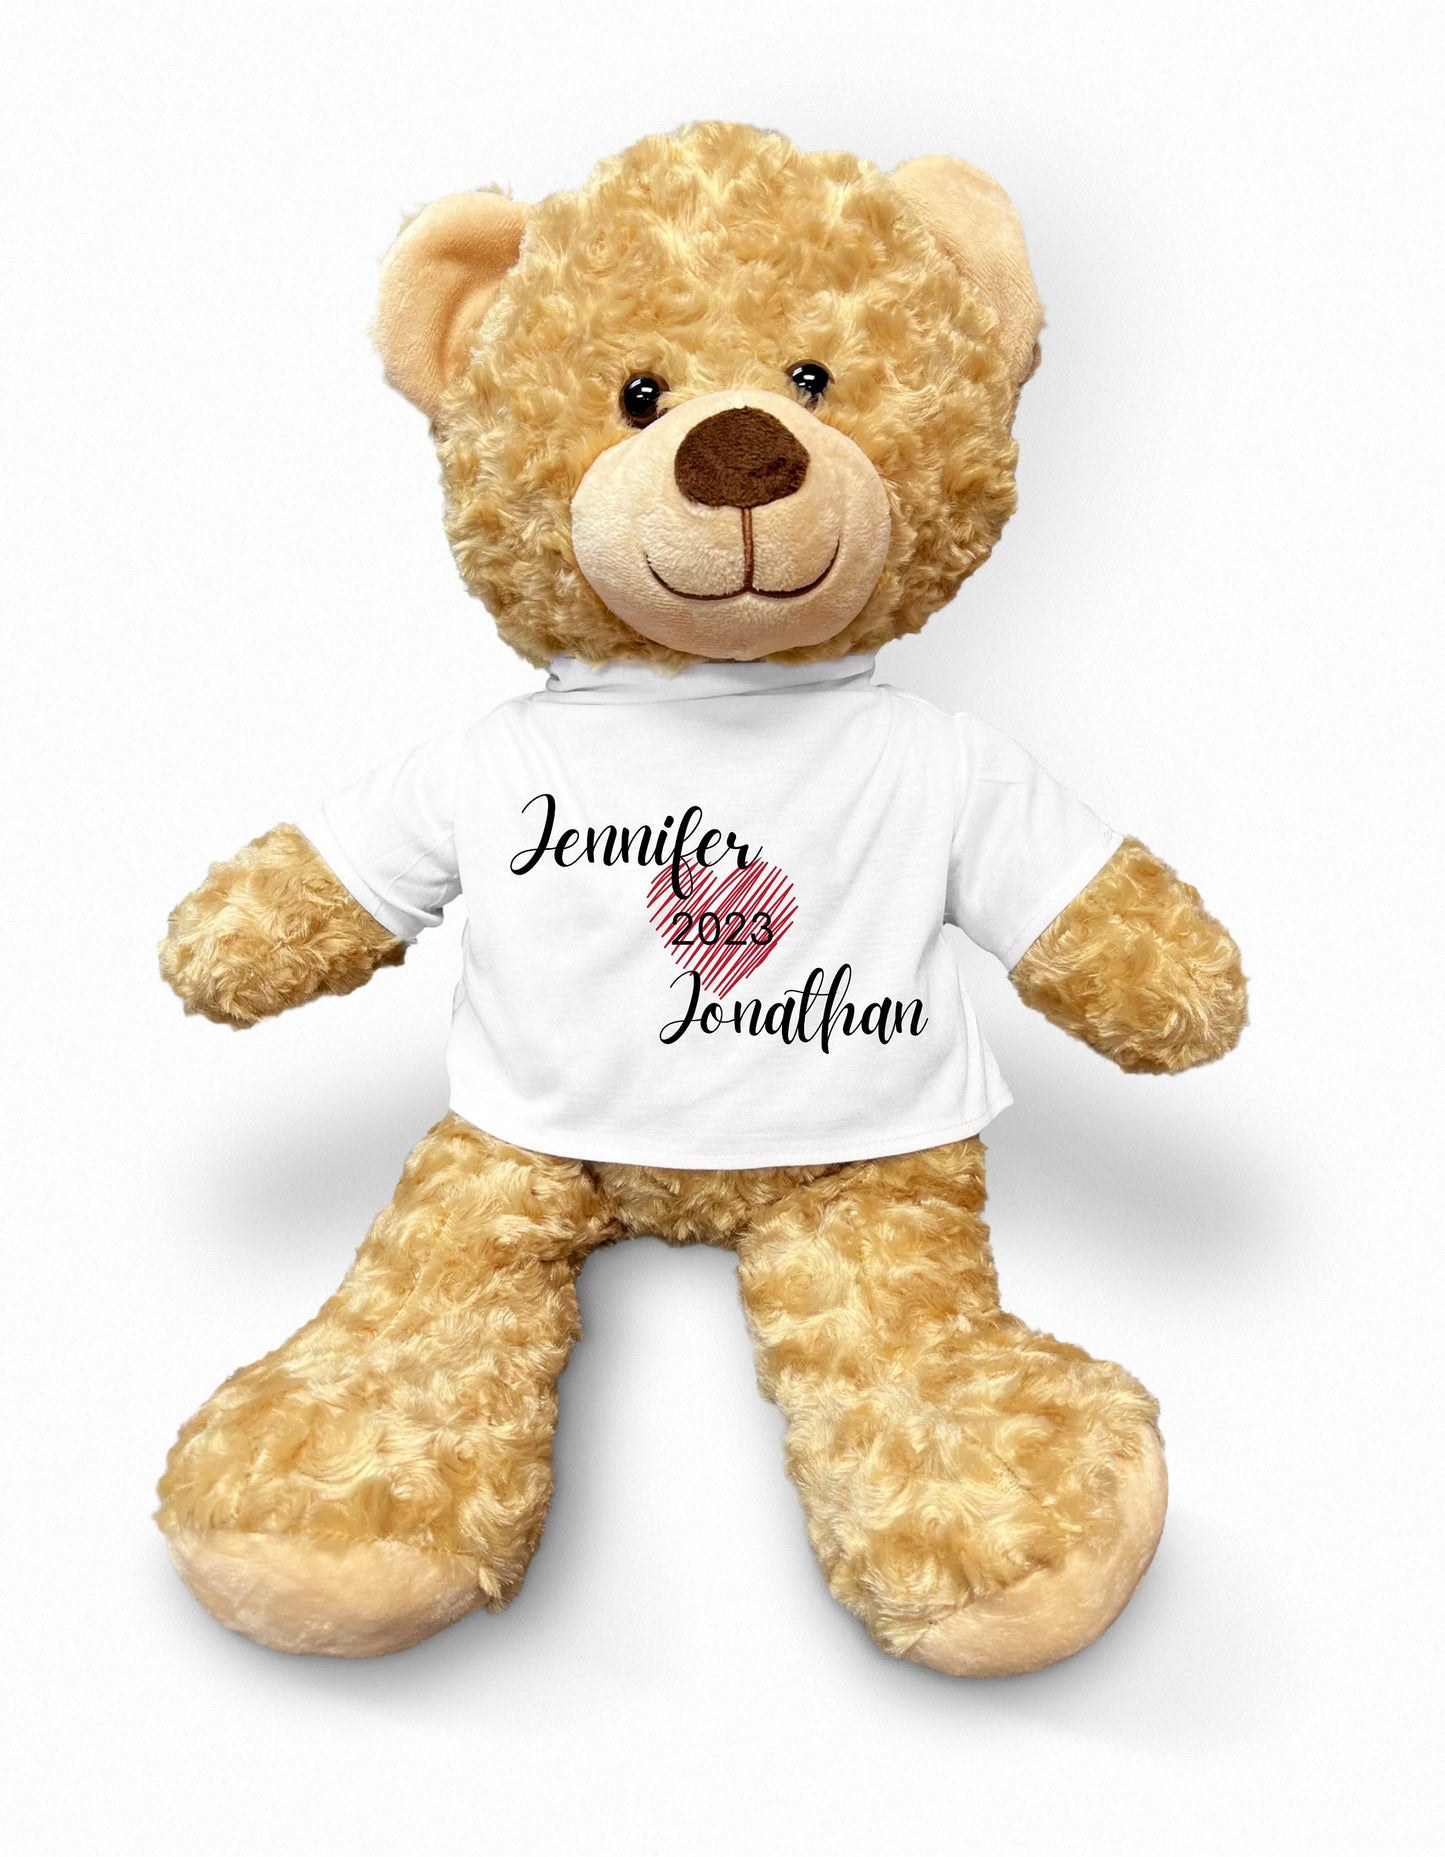 Couples Teddy Bear, Engagement Gift, Wedding Gift, Love You Gift, Gift for a Couple, Love Gift, Love Teddy Bear, Customized, Personalized